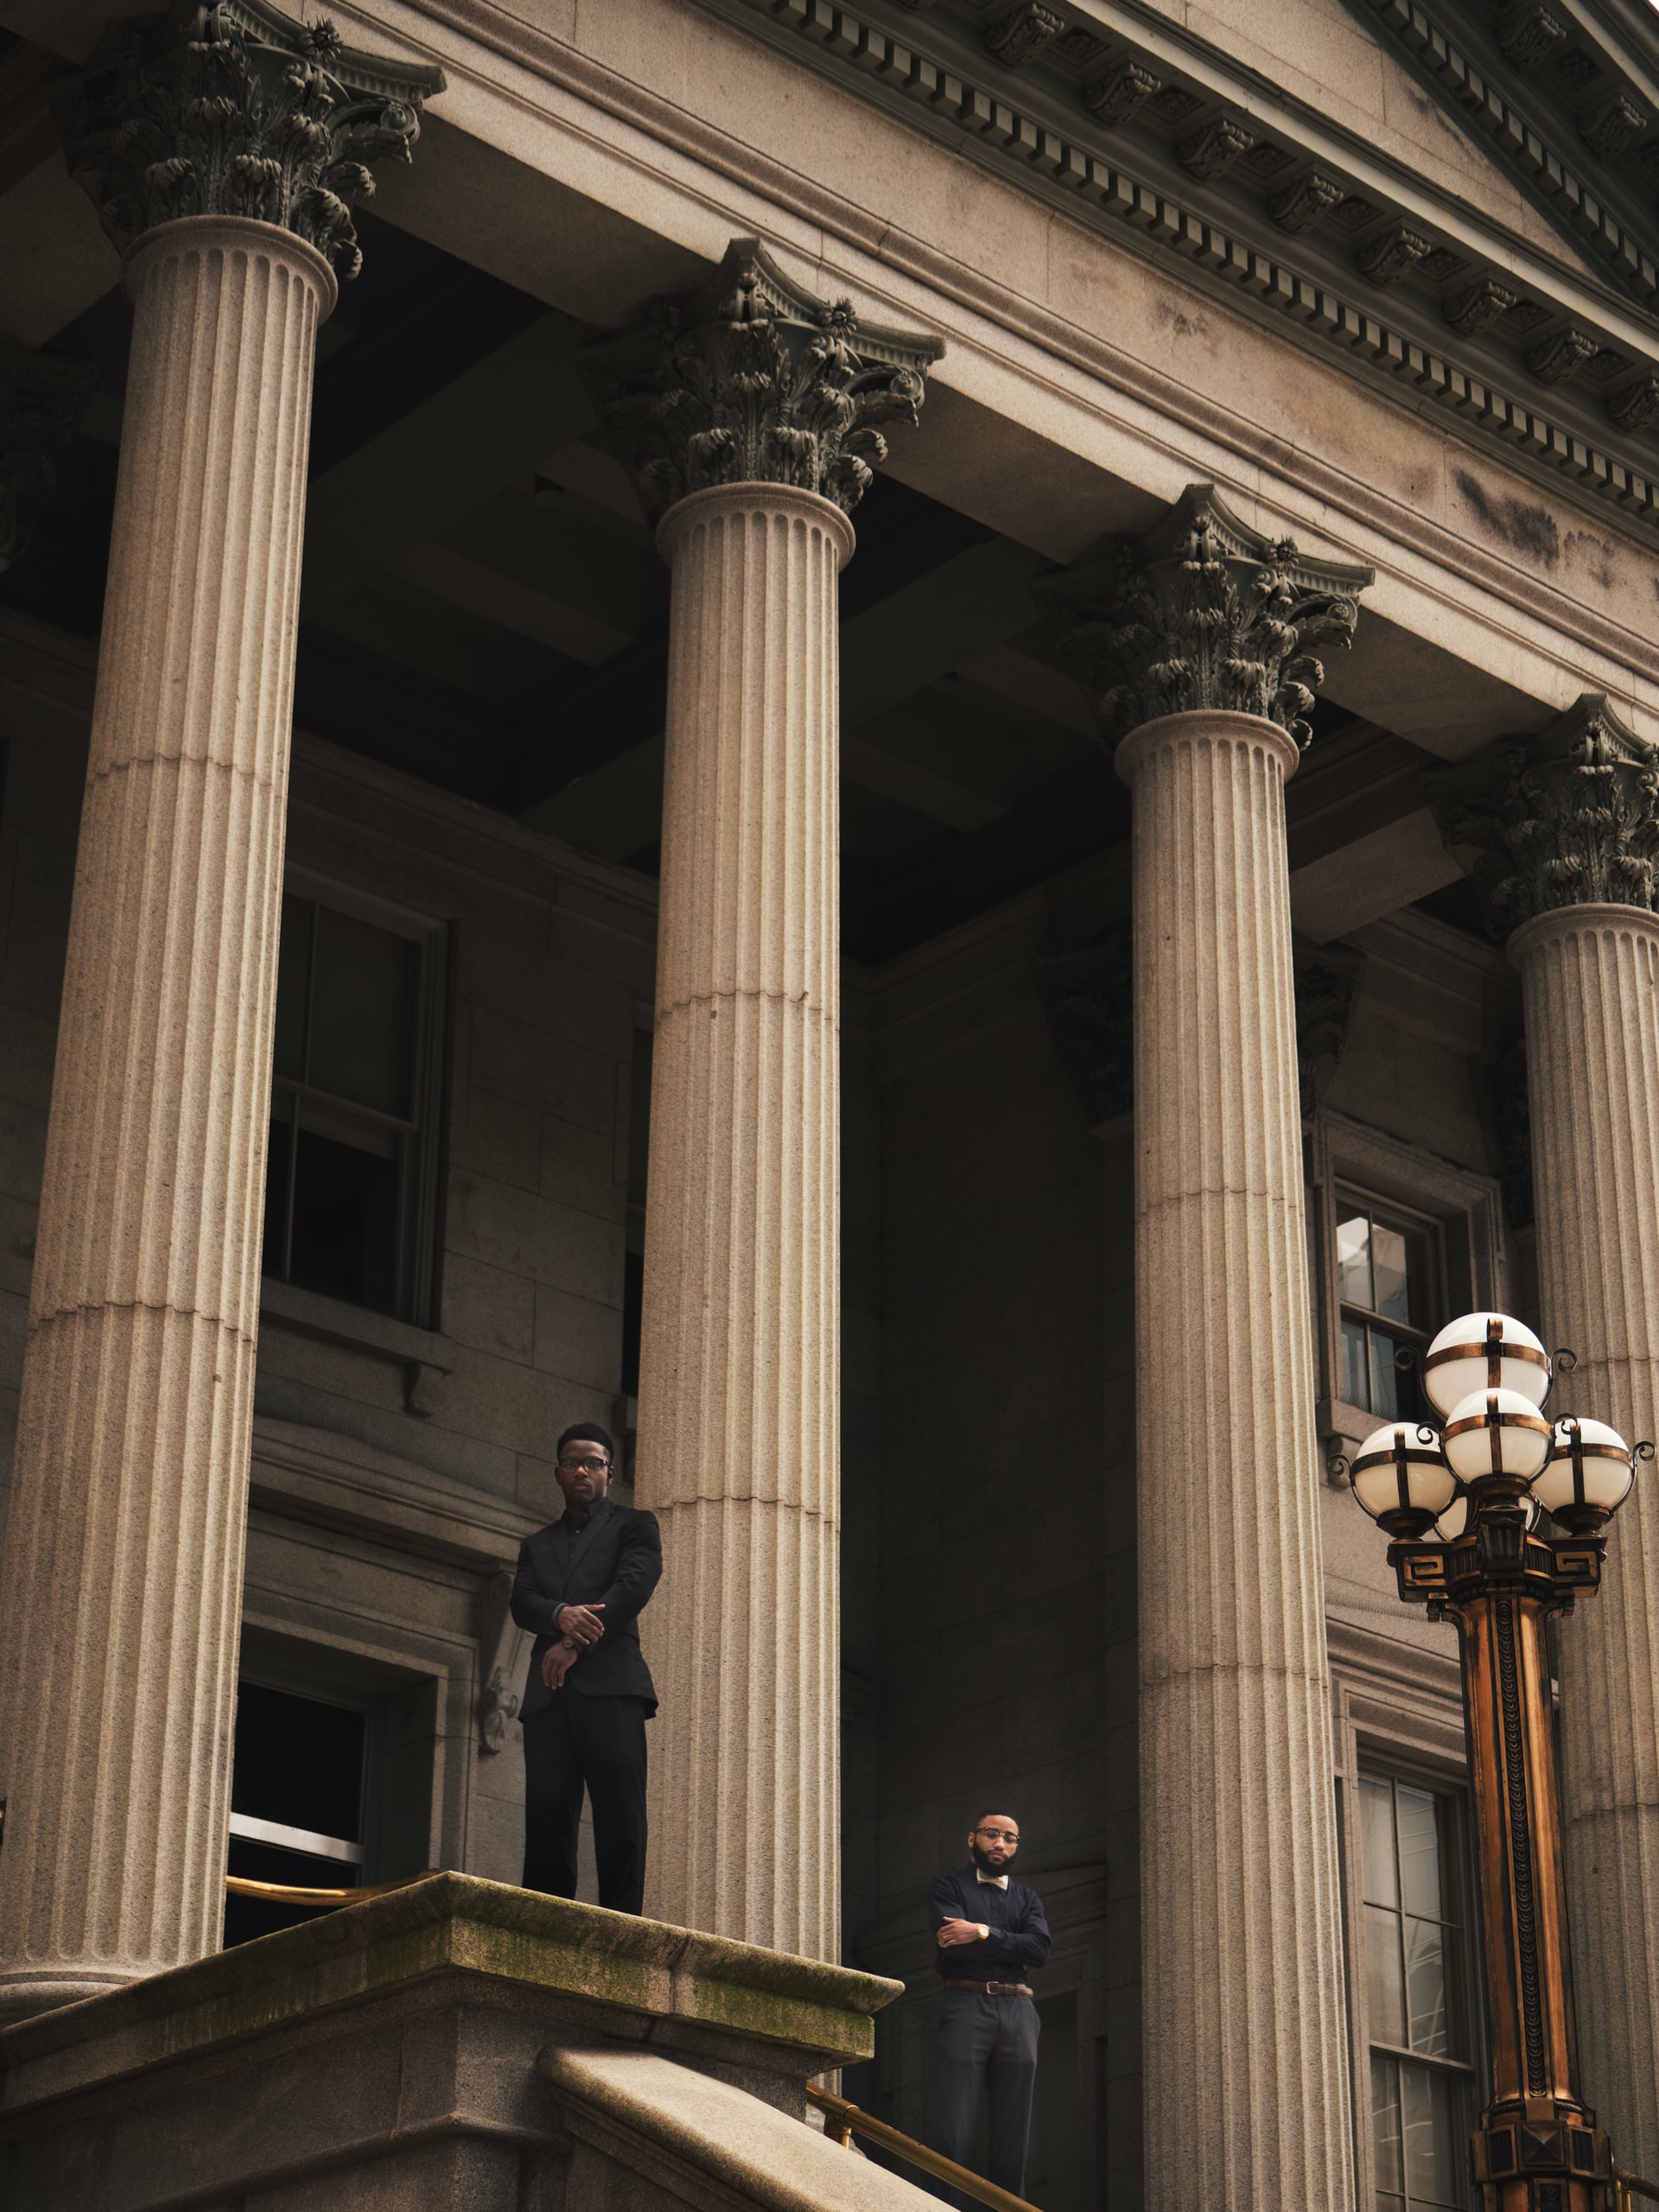 private security guards patrolling a secured government property